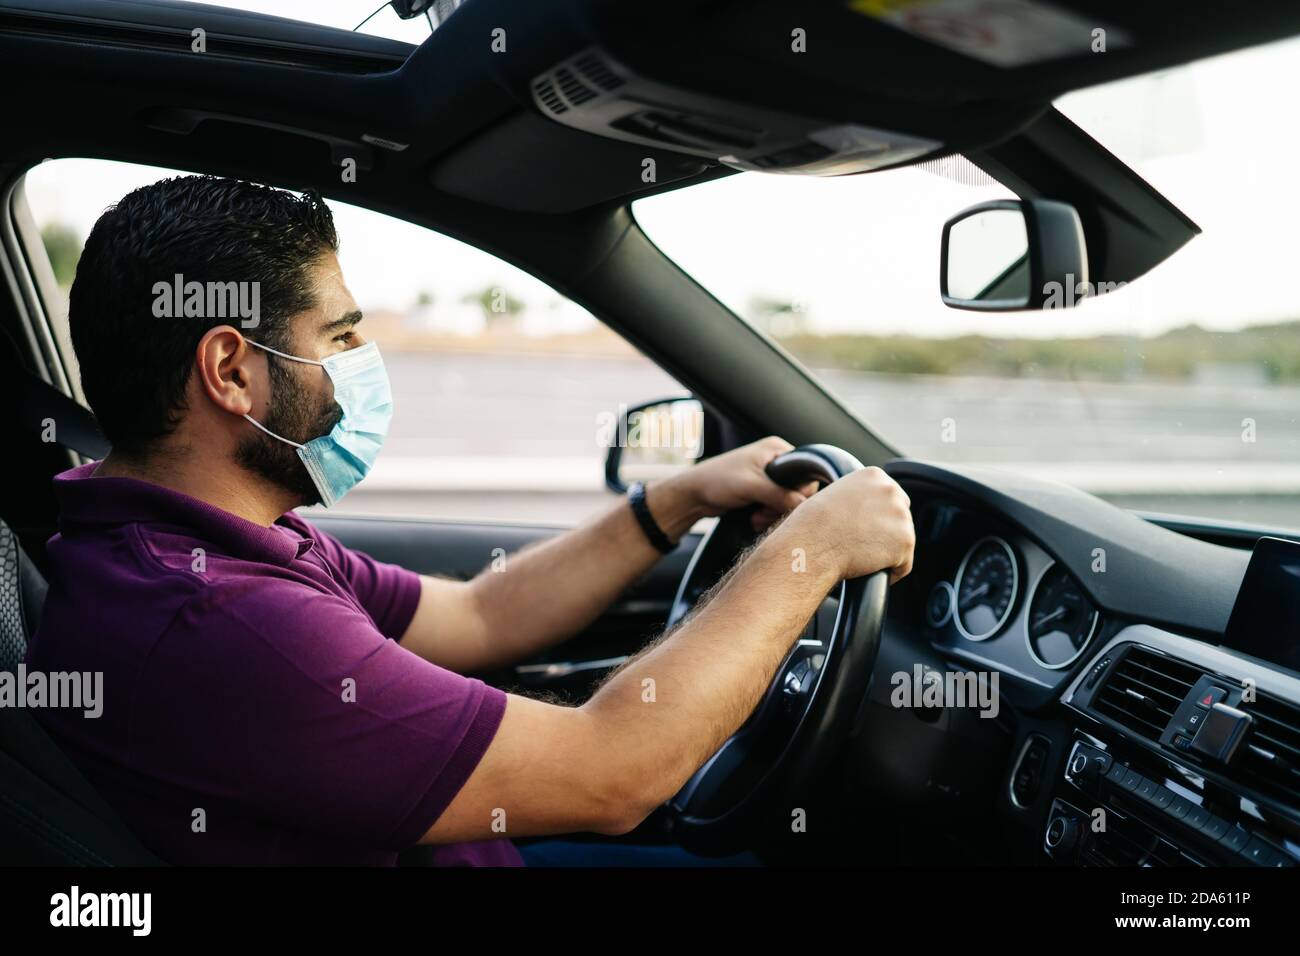 Man driving a car wearing on a medical mask during a Covid-19 pandemic Stock Photo